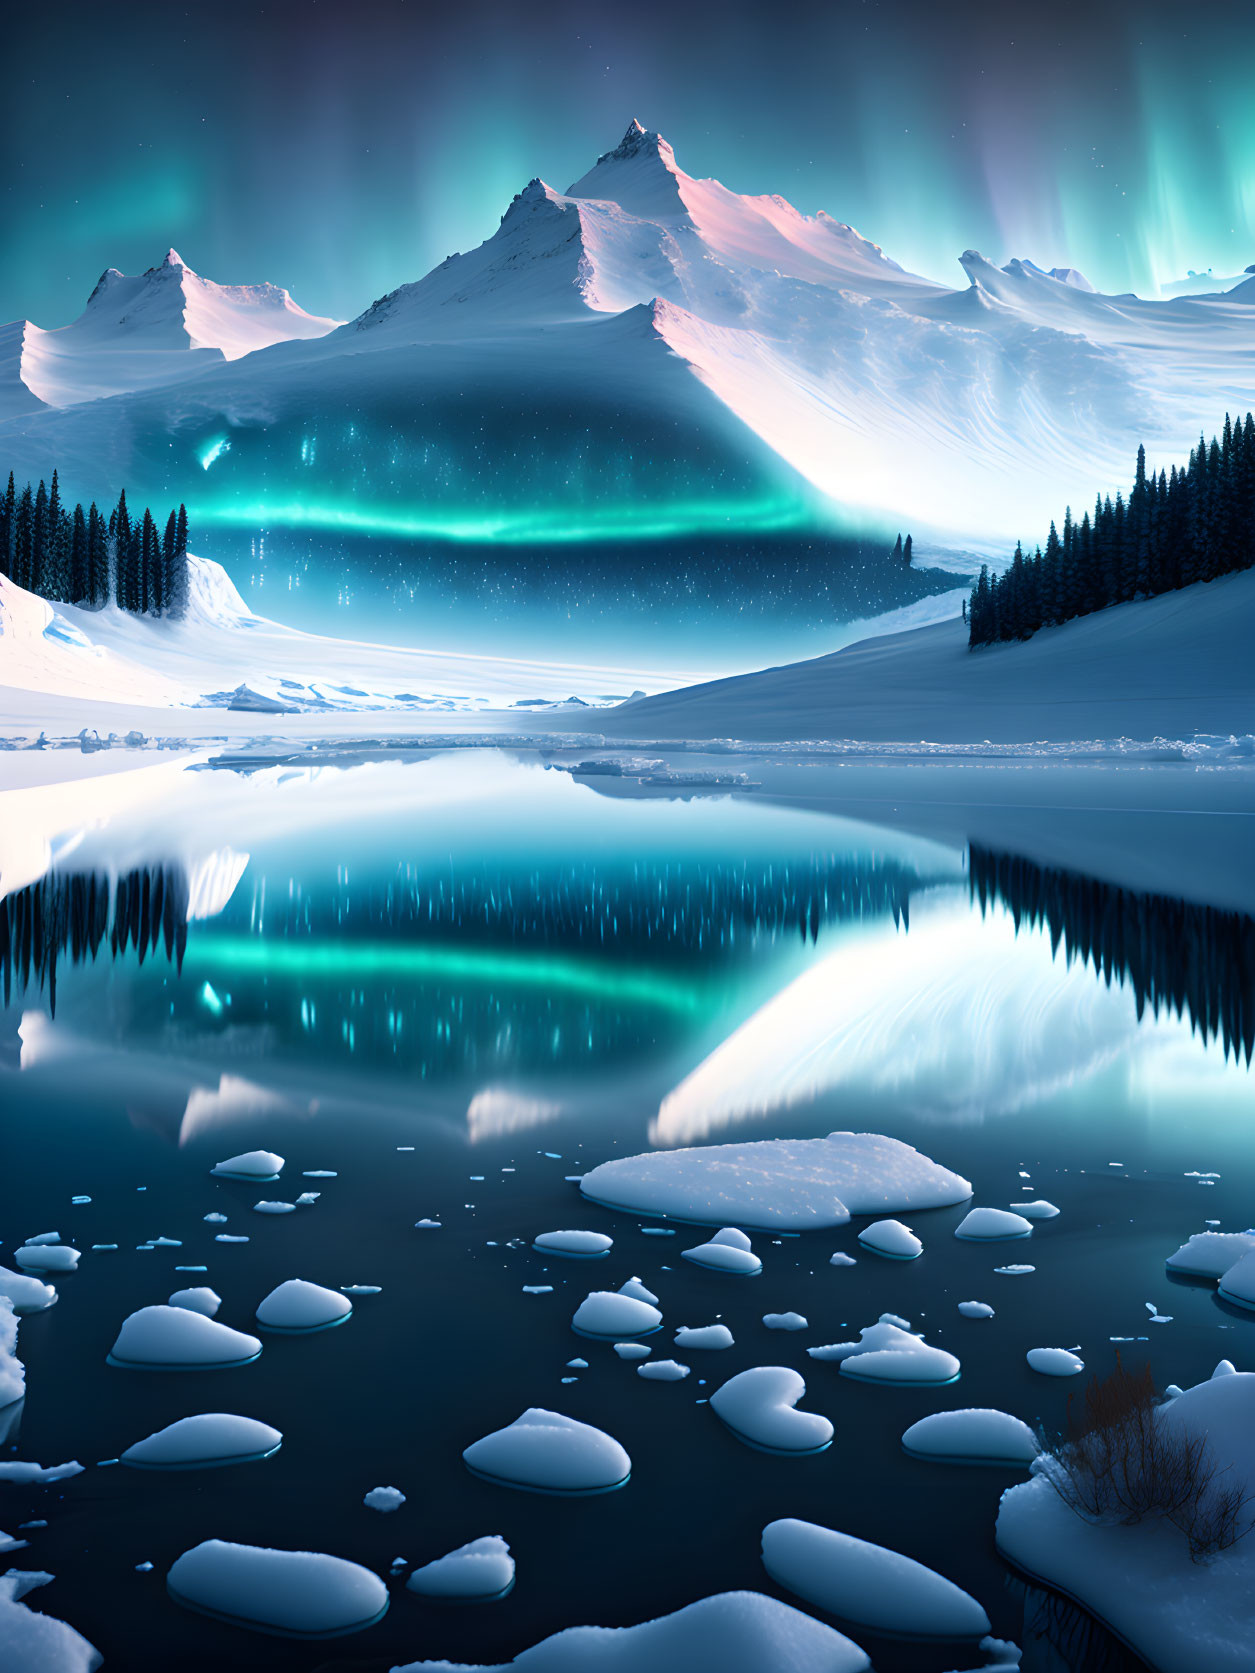 Icy reflections